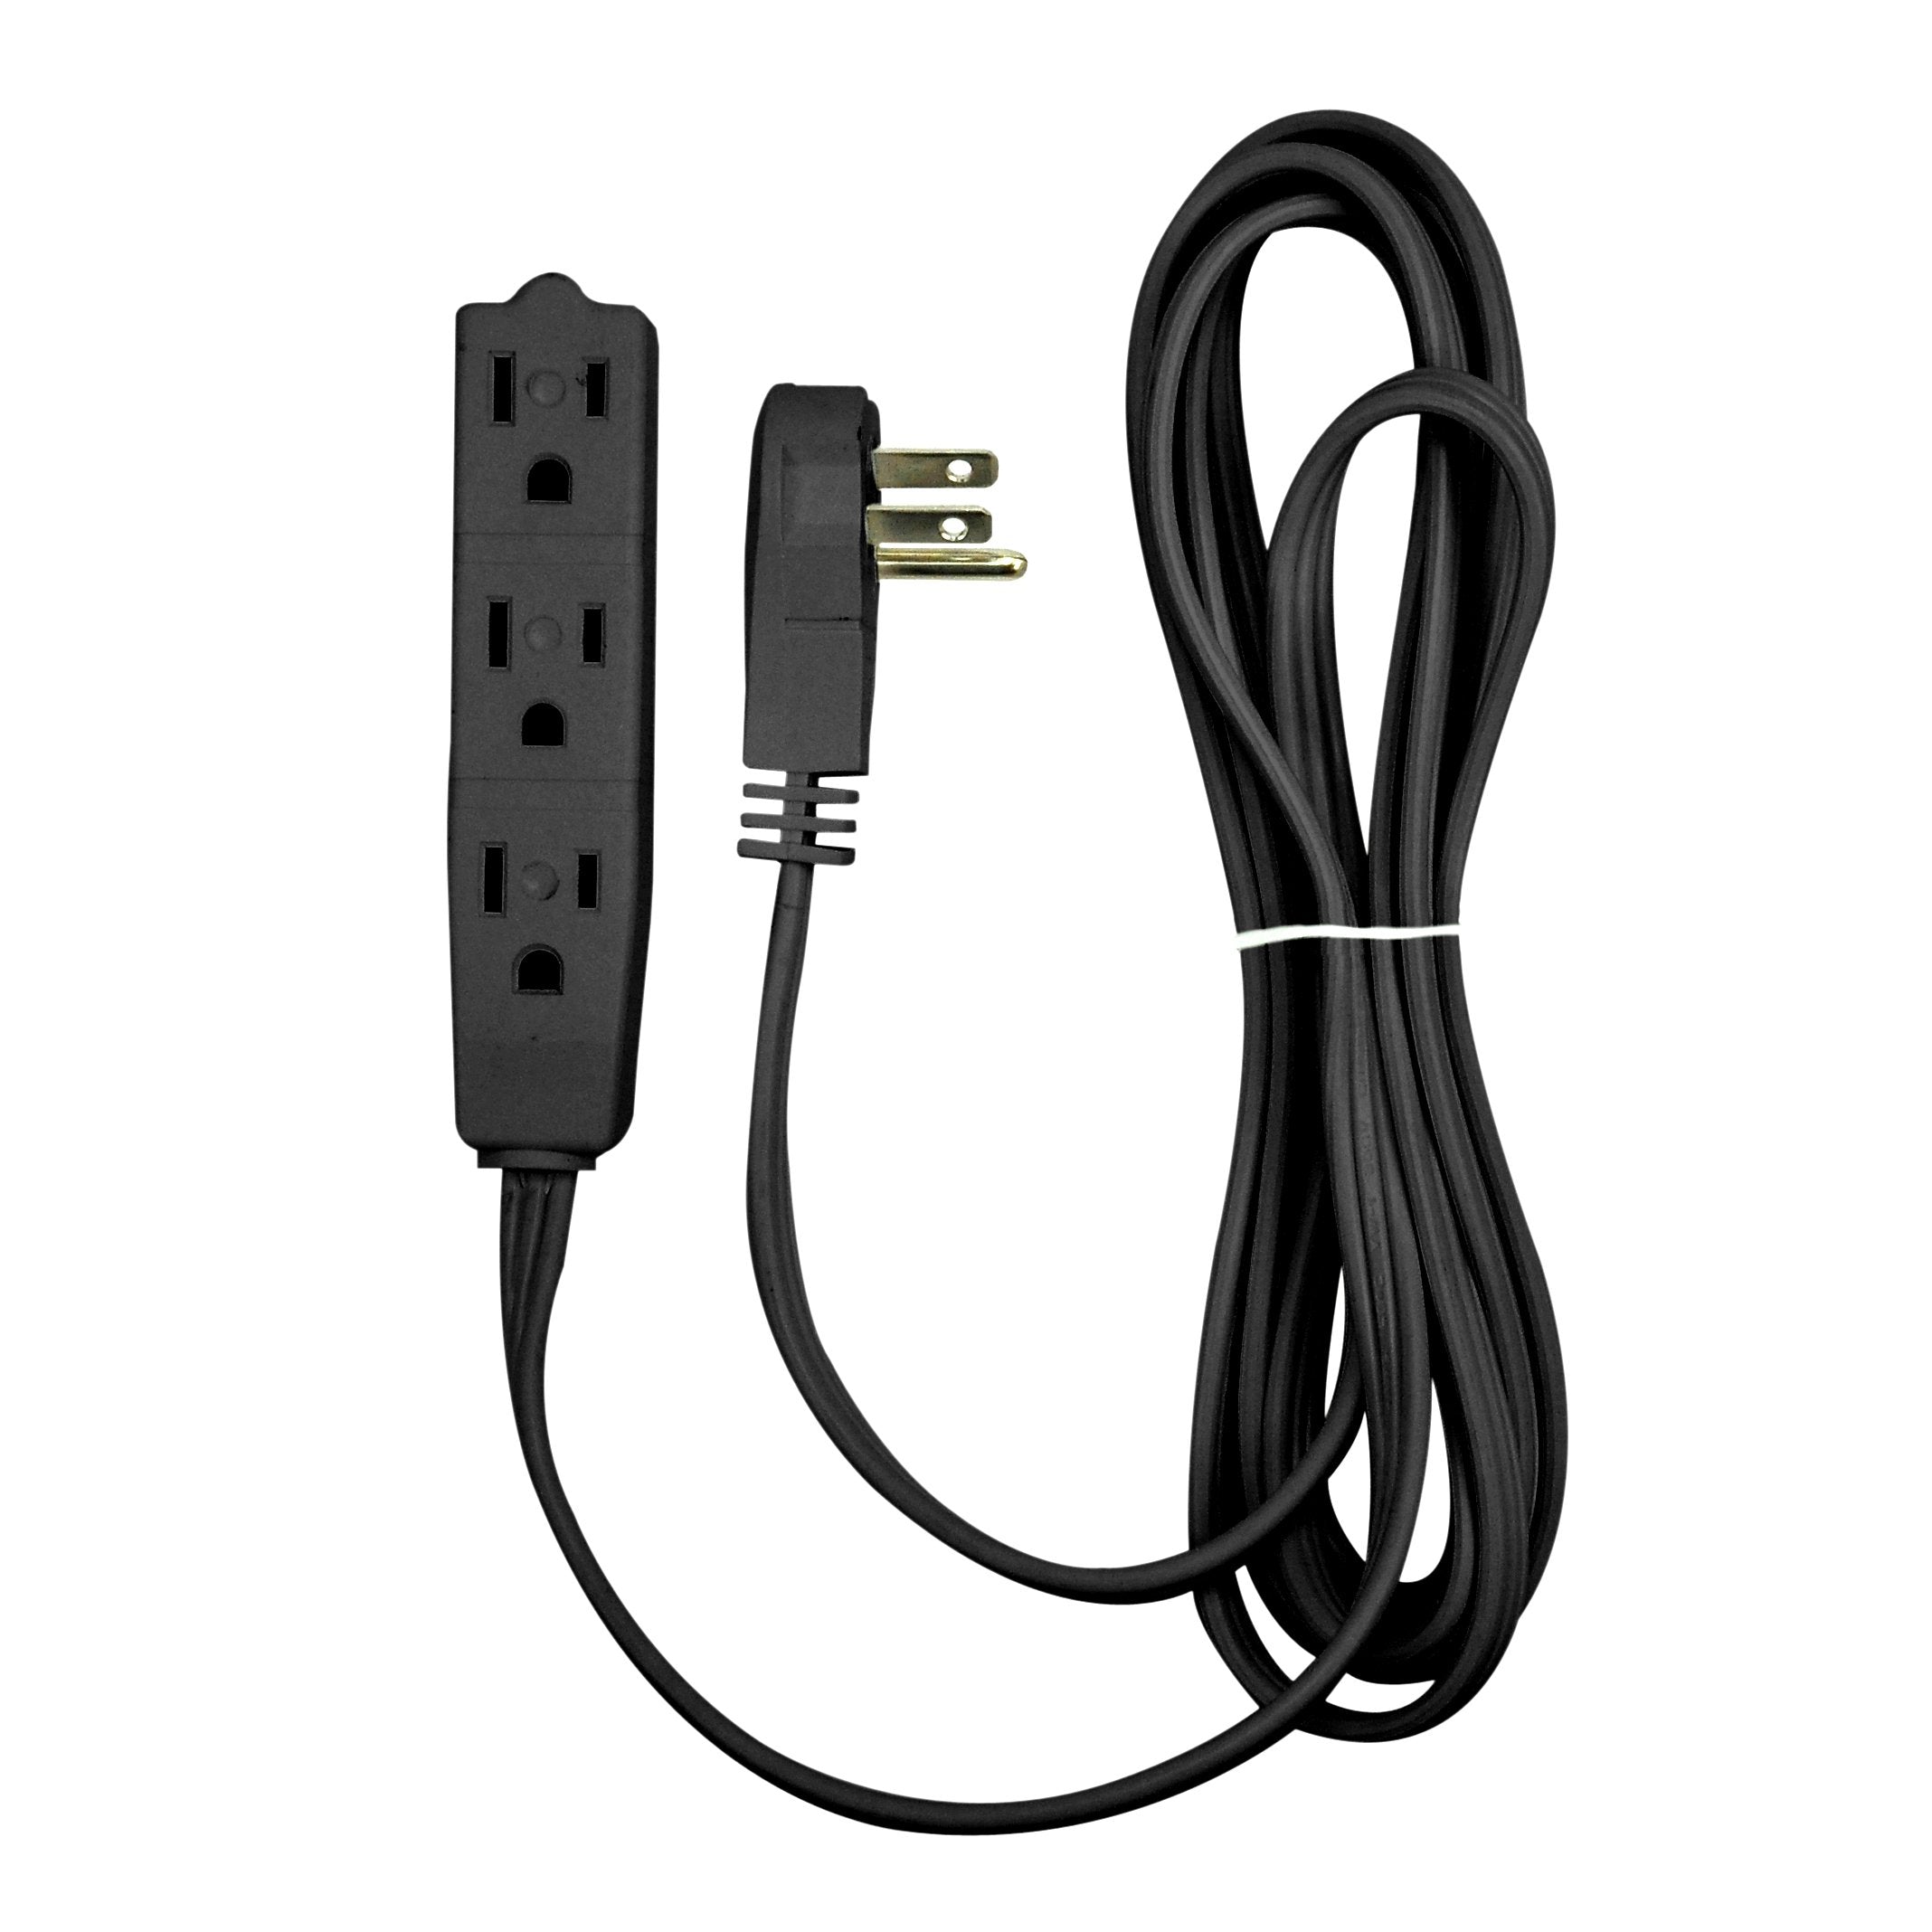 Flat Multiple Outlet Extension Cord for Indoor Use by Bindmaster- UL-Listed 3-Prong Multi Extension Wire- Space-Saving Flat Angled Extension Cord- Black  - Like New